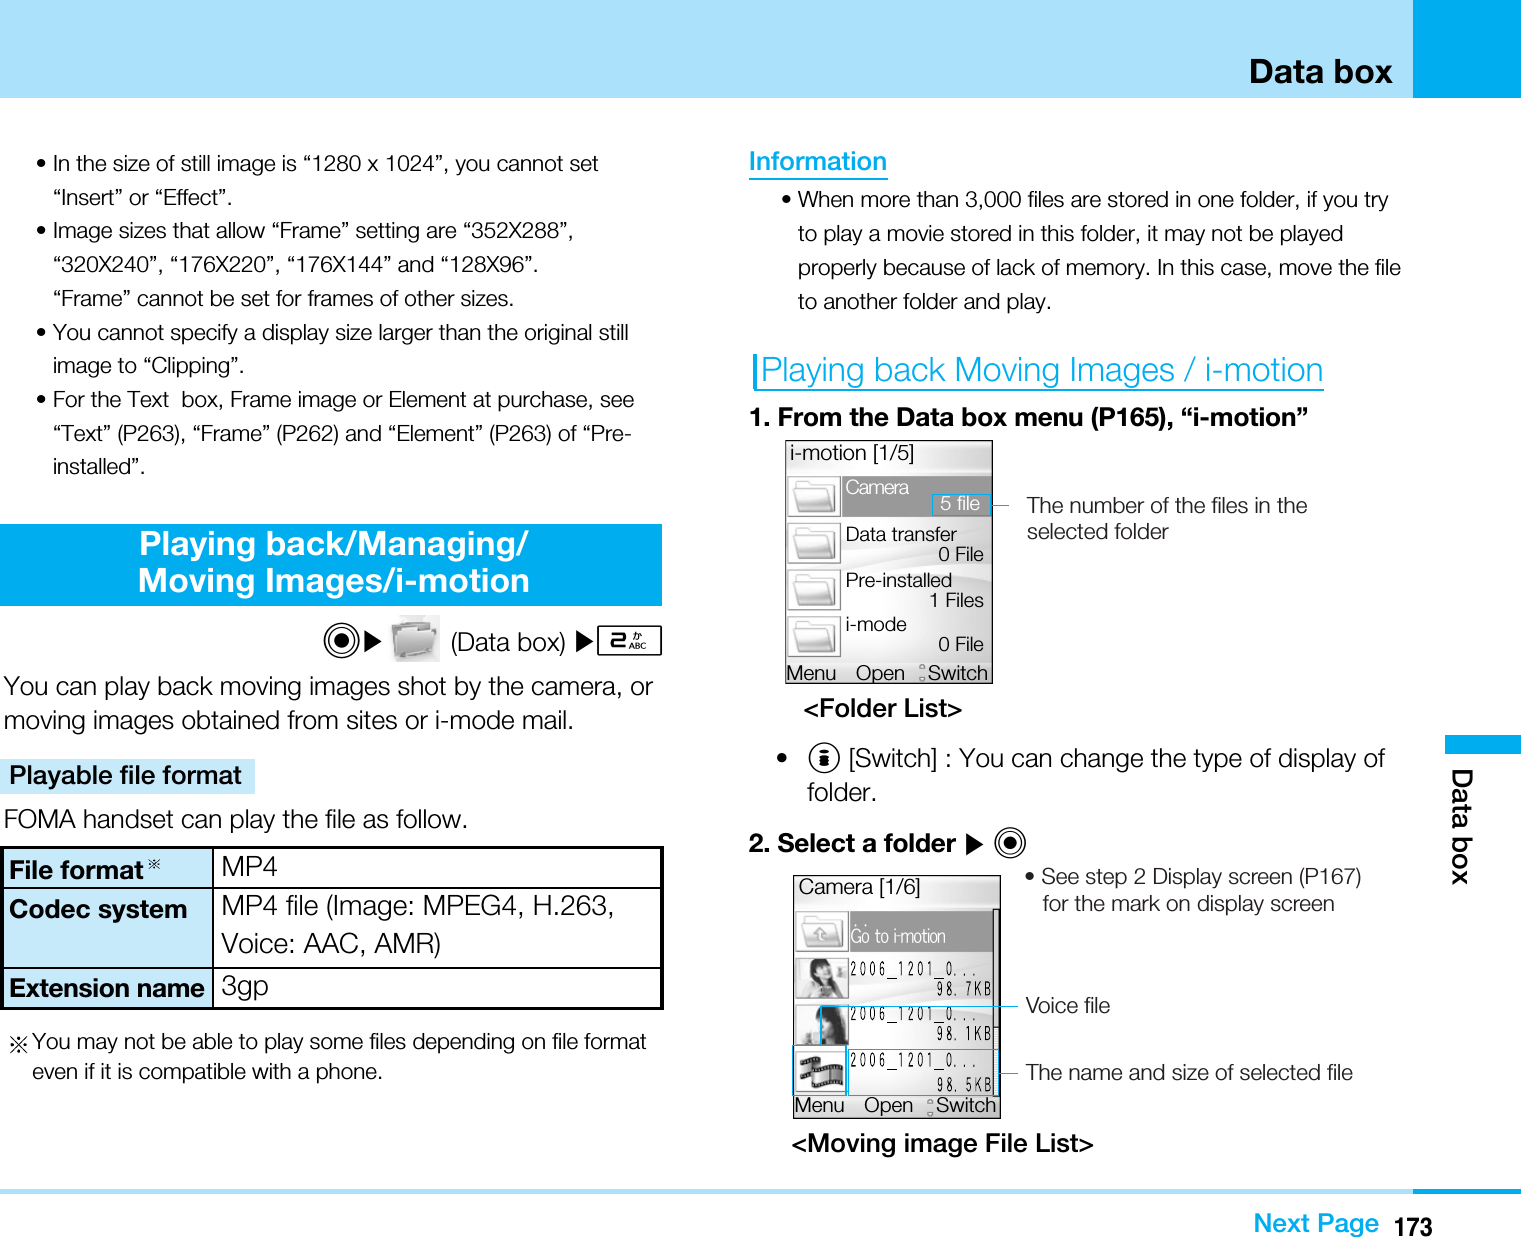 173Data boxData boxNext Page• In the size of still image is “1280 x 1024”, you cannot set“Insert” or “Effect”.• Image sizes that allow “Frame” setting are “352X288”,“320X240”, “176X220”, “176X144” and “128X96”.“Frame” cannot be set for frames of other sizes.• You cannot specify a display size larger than the original stillimage to “Clipping”.• For the Text  box, Frame image or Element at purchase, see“Text” (P263), “Frame” (P262) and “Element” (P263) of “Pre-installed”.Playing back/Managing/Moving Images/i-motionC](Data box) ]2You can play back moving images shot by the camera, ormoving images obtained from sites or i-mode mail. Playable file formatFOMA handset can play the file as follow.You may not be able to play some files depending on file formateven if it is compatible with a phone.Information• When more than 3,000 files are stored in one folder, if you tryto play a movie stored in this folder, it may not be playedproperly because of lack of memory. In this case, move the fileto another folder and play. Playing back Moving Images / i-motion1. From the Data box menu (P165), “i-motion”&lt;Folder List&gt;•I[Switch] : You can change the type of display offolder.2. Select a folder ]C&lt;Moving image File List&gt;Hp!up!j.npujpoCamera [1/6]OpenMenu Switch• See step 2 Display screen (P167)    for the mark on display screenVoice fileThe name and size of selected file OpenMenu Switchi-motion [1/5]CameraData transfer0 File5 filePre-installed1 Filesi-mode 0 FileThe number of the files in the selected folderCodec systemFile formatExtension nameMP4MP4 file (Image: MPEG4, H.263,Voice: AAC, AMR)3gp